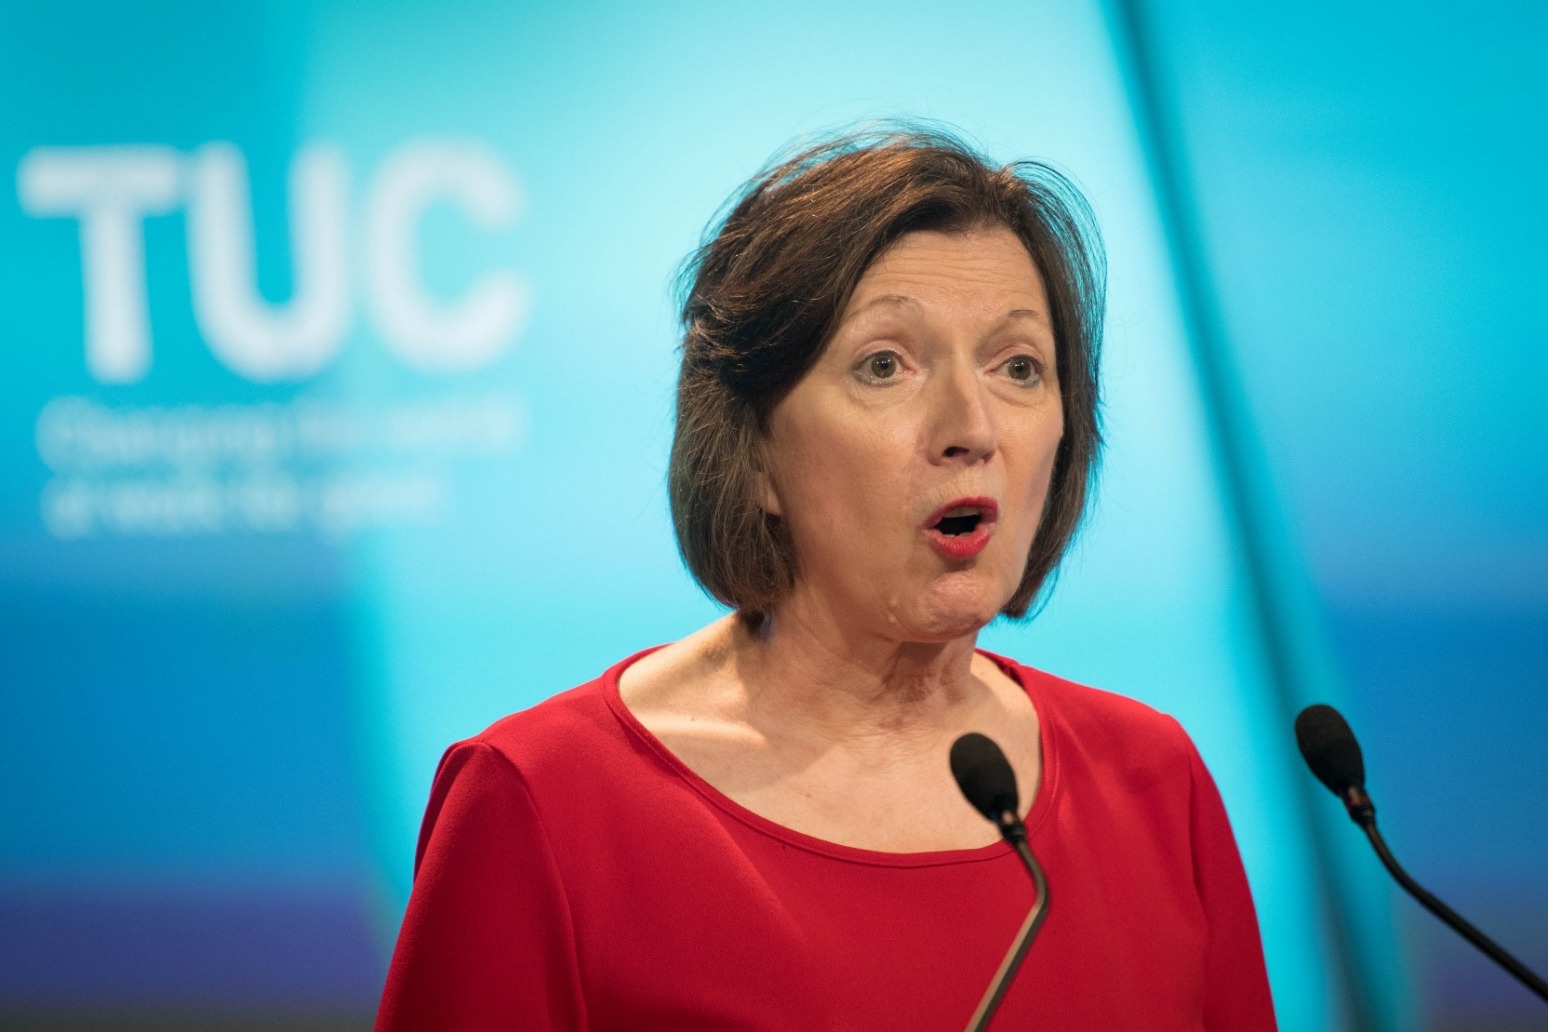 TUC says 2022 has been worst year for real pay growth for almost 50 years 